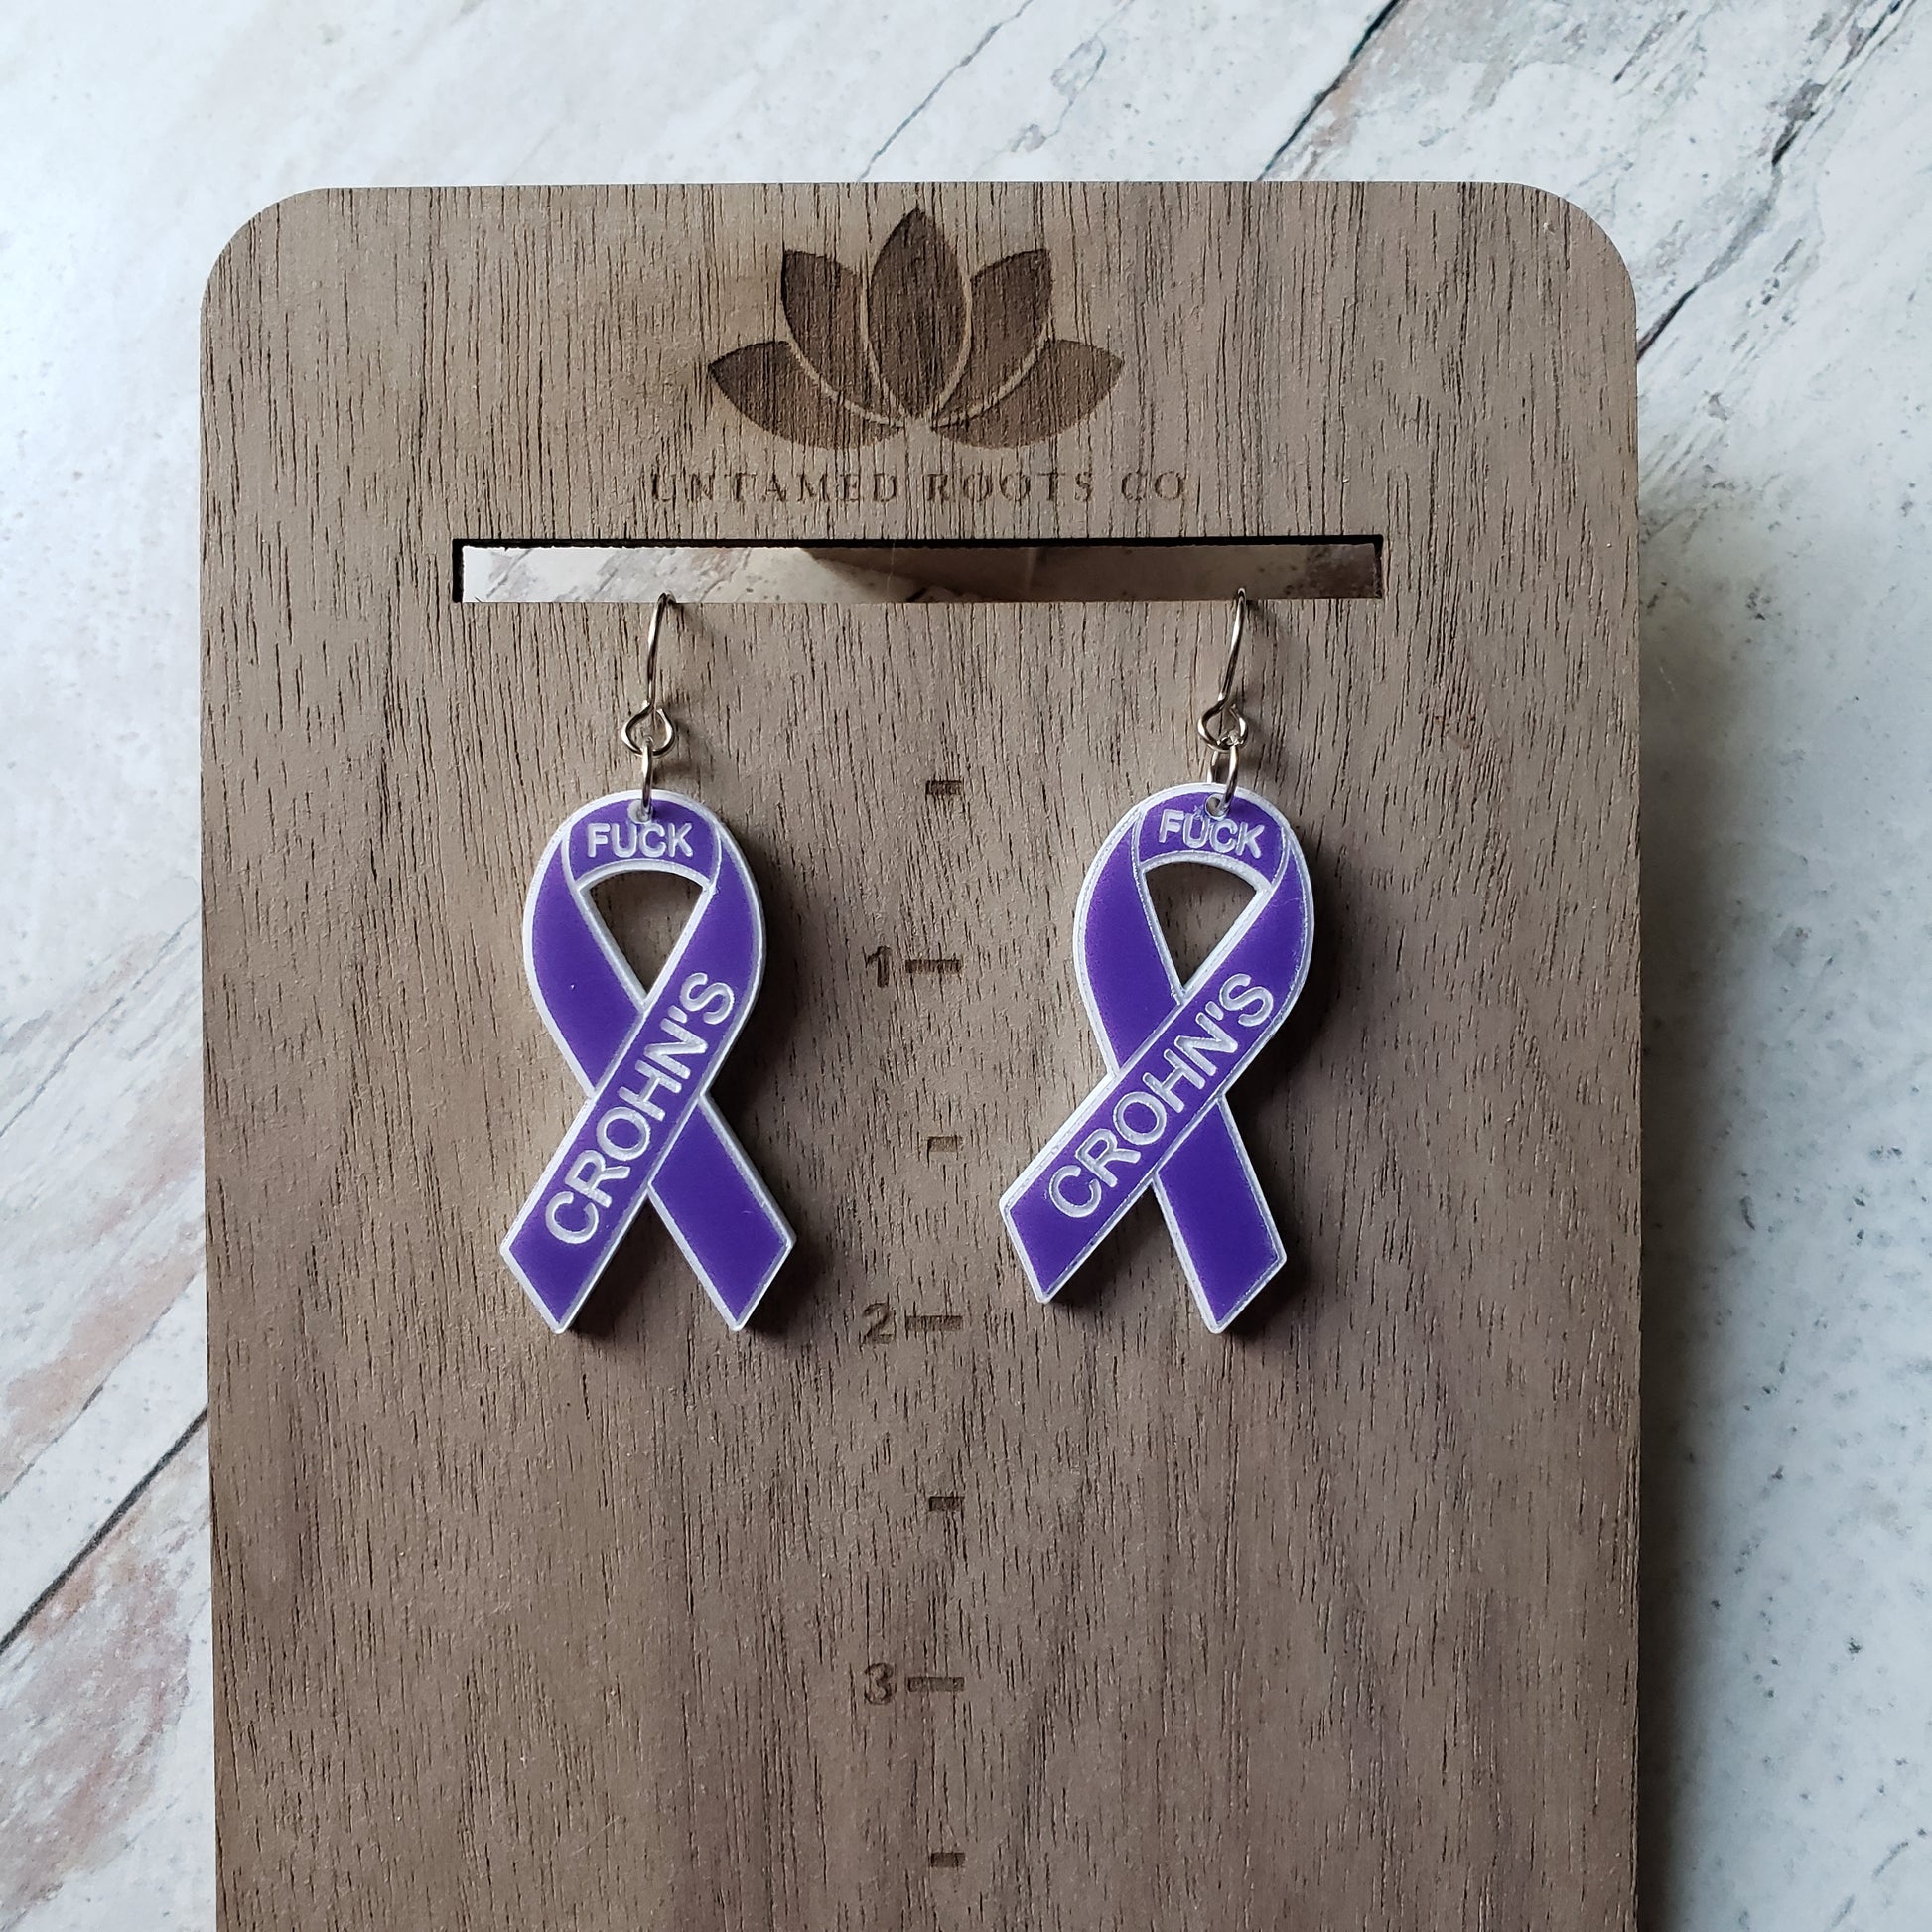 Pair of purple awareness ribbons, with engraving. Stainless steel earring wires. Size reference.